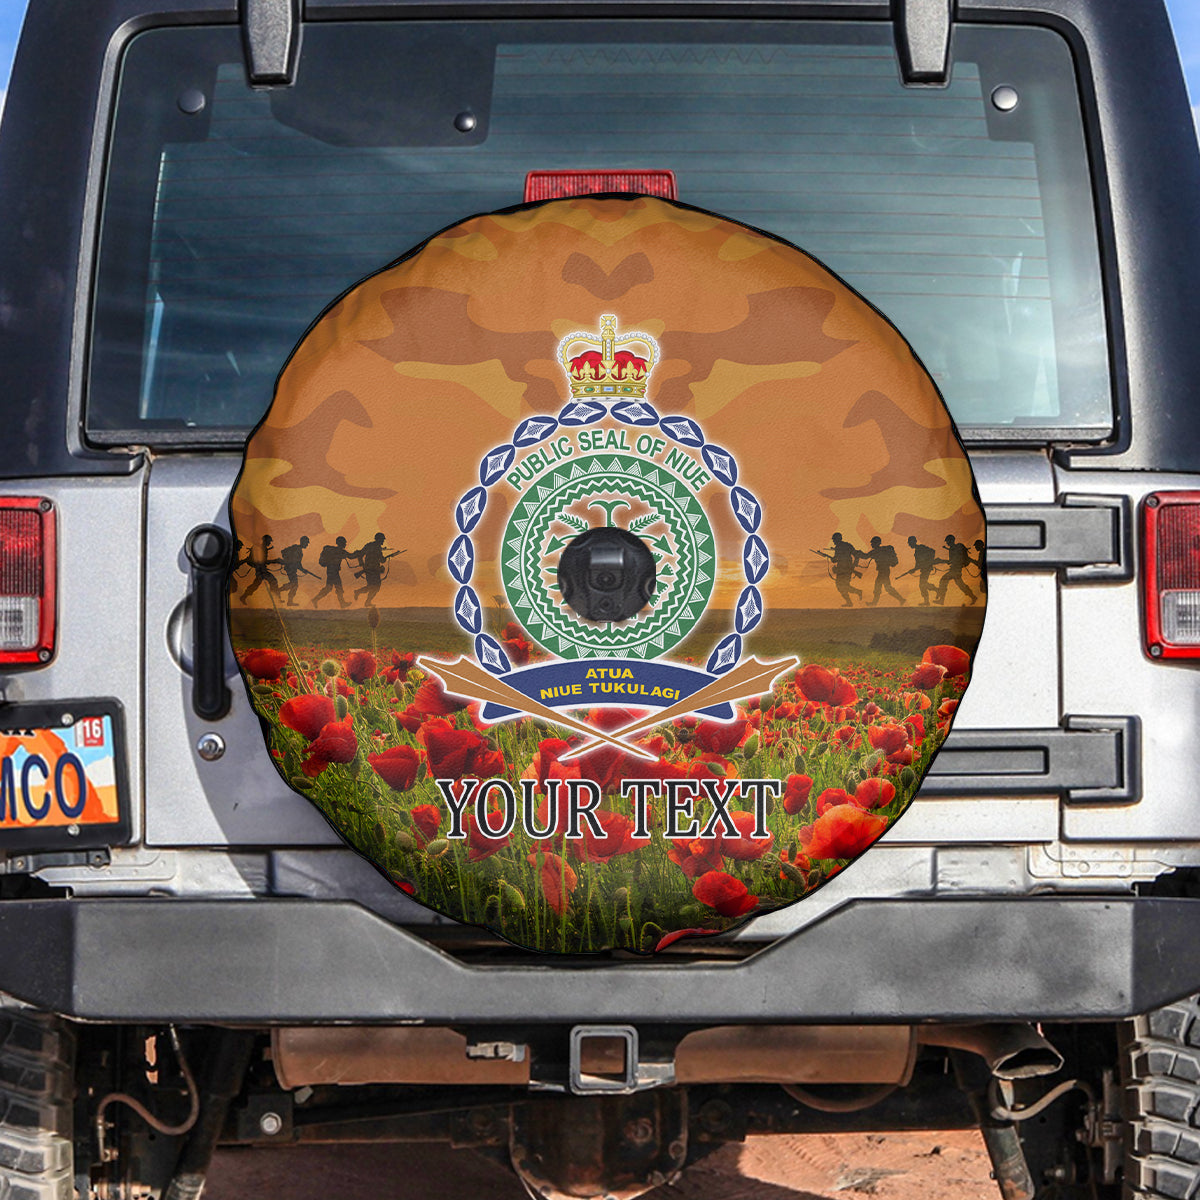 Niue ANZAC Day Personalised Spare Tire Cover with Poppy Field LT9 Art - Polynesian Pride